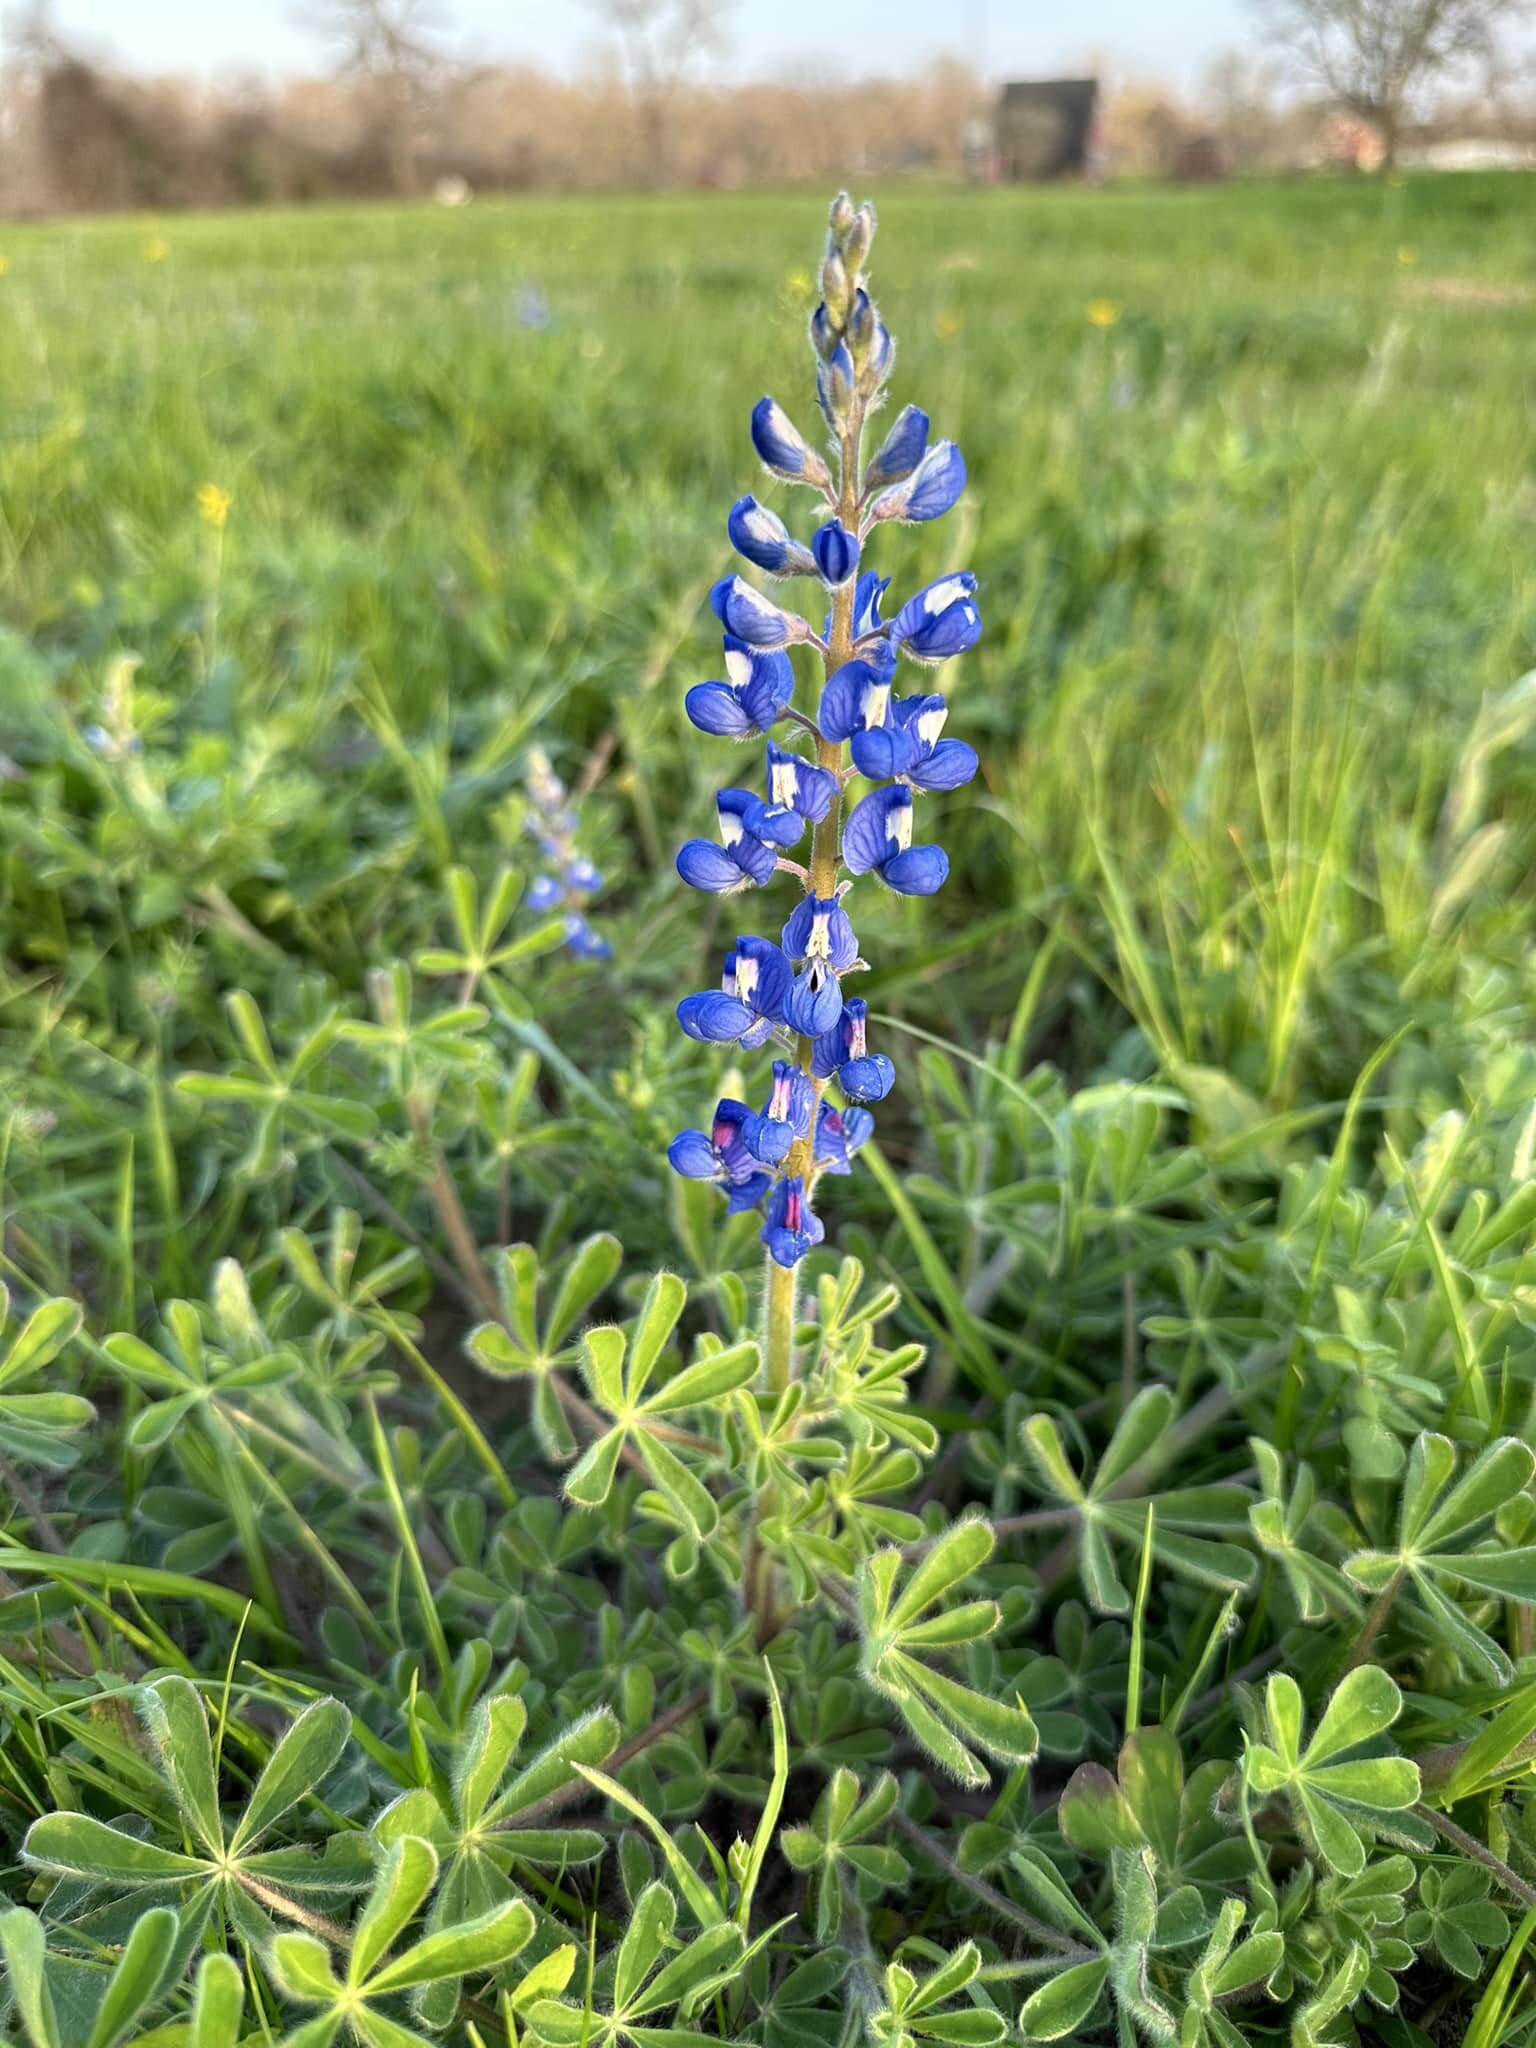 Spring is officially here in Texas! We cannot wait to see the fields of wildflowers unlike any other place in the world. Our conservative values and home are worth fighting for, and we will always be a voice for the people! Vote #kunkleforcongress on